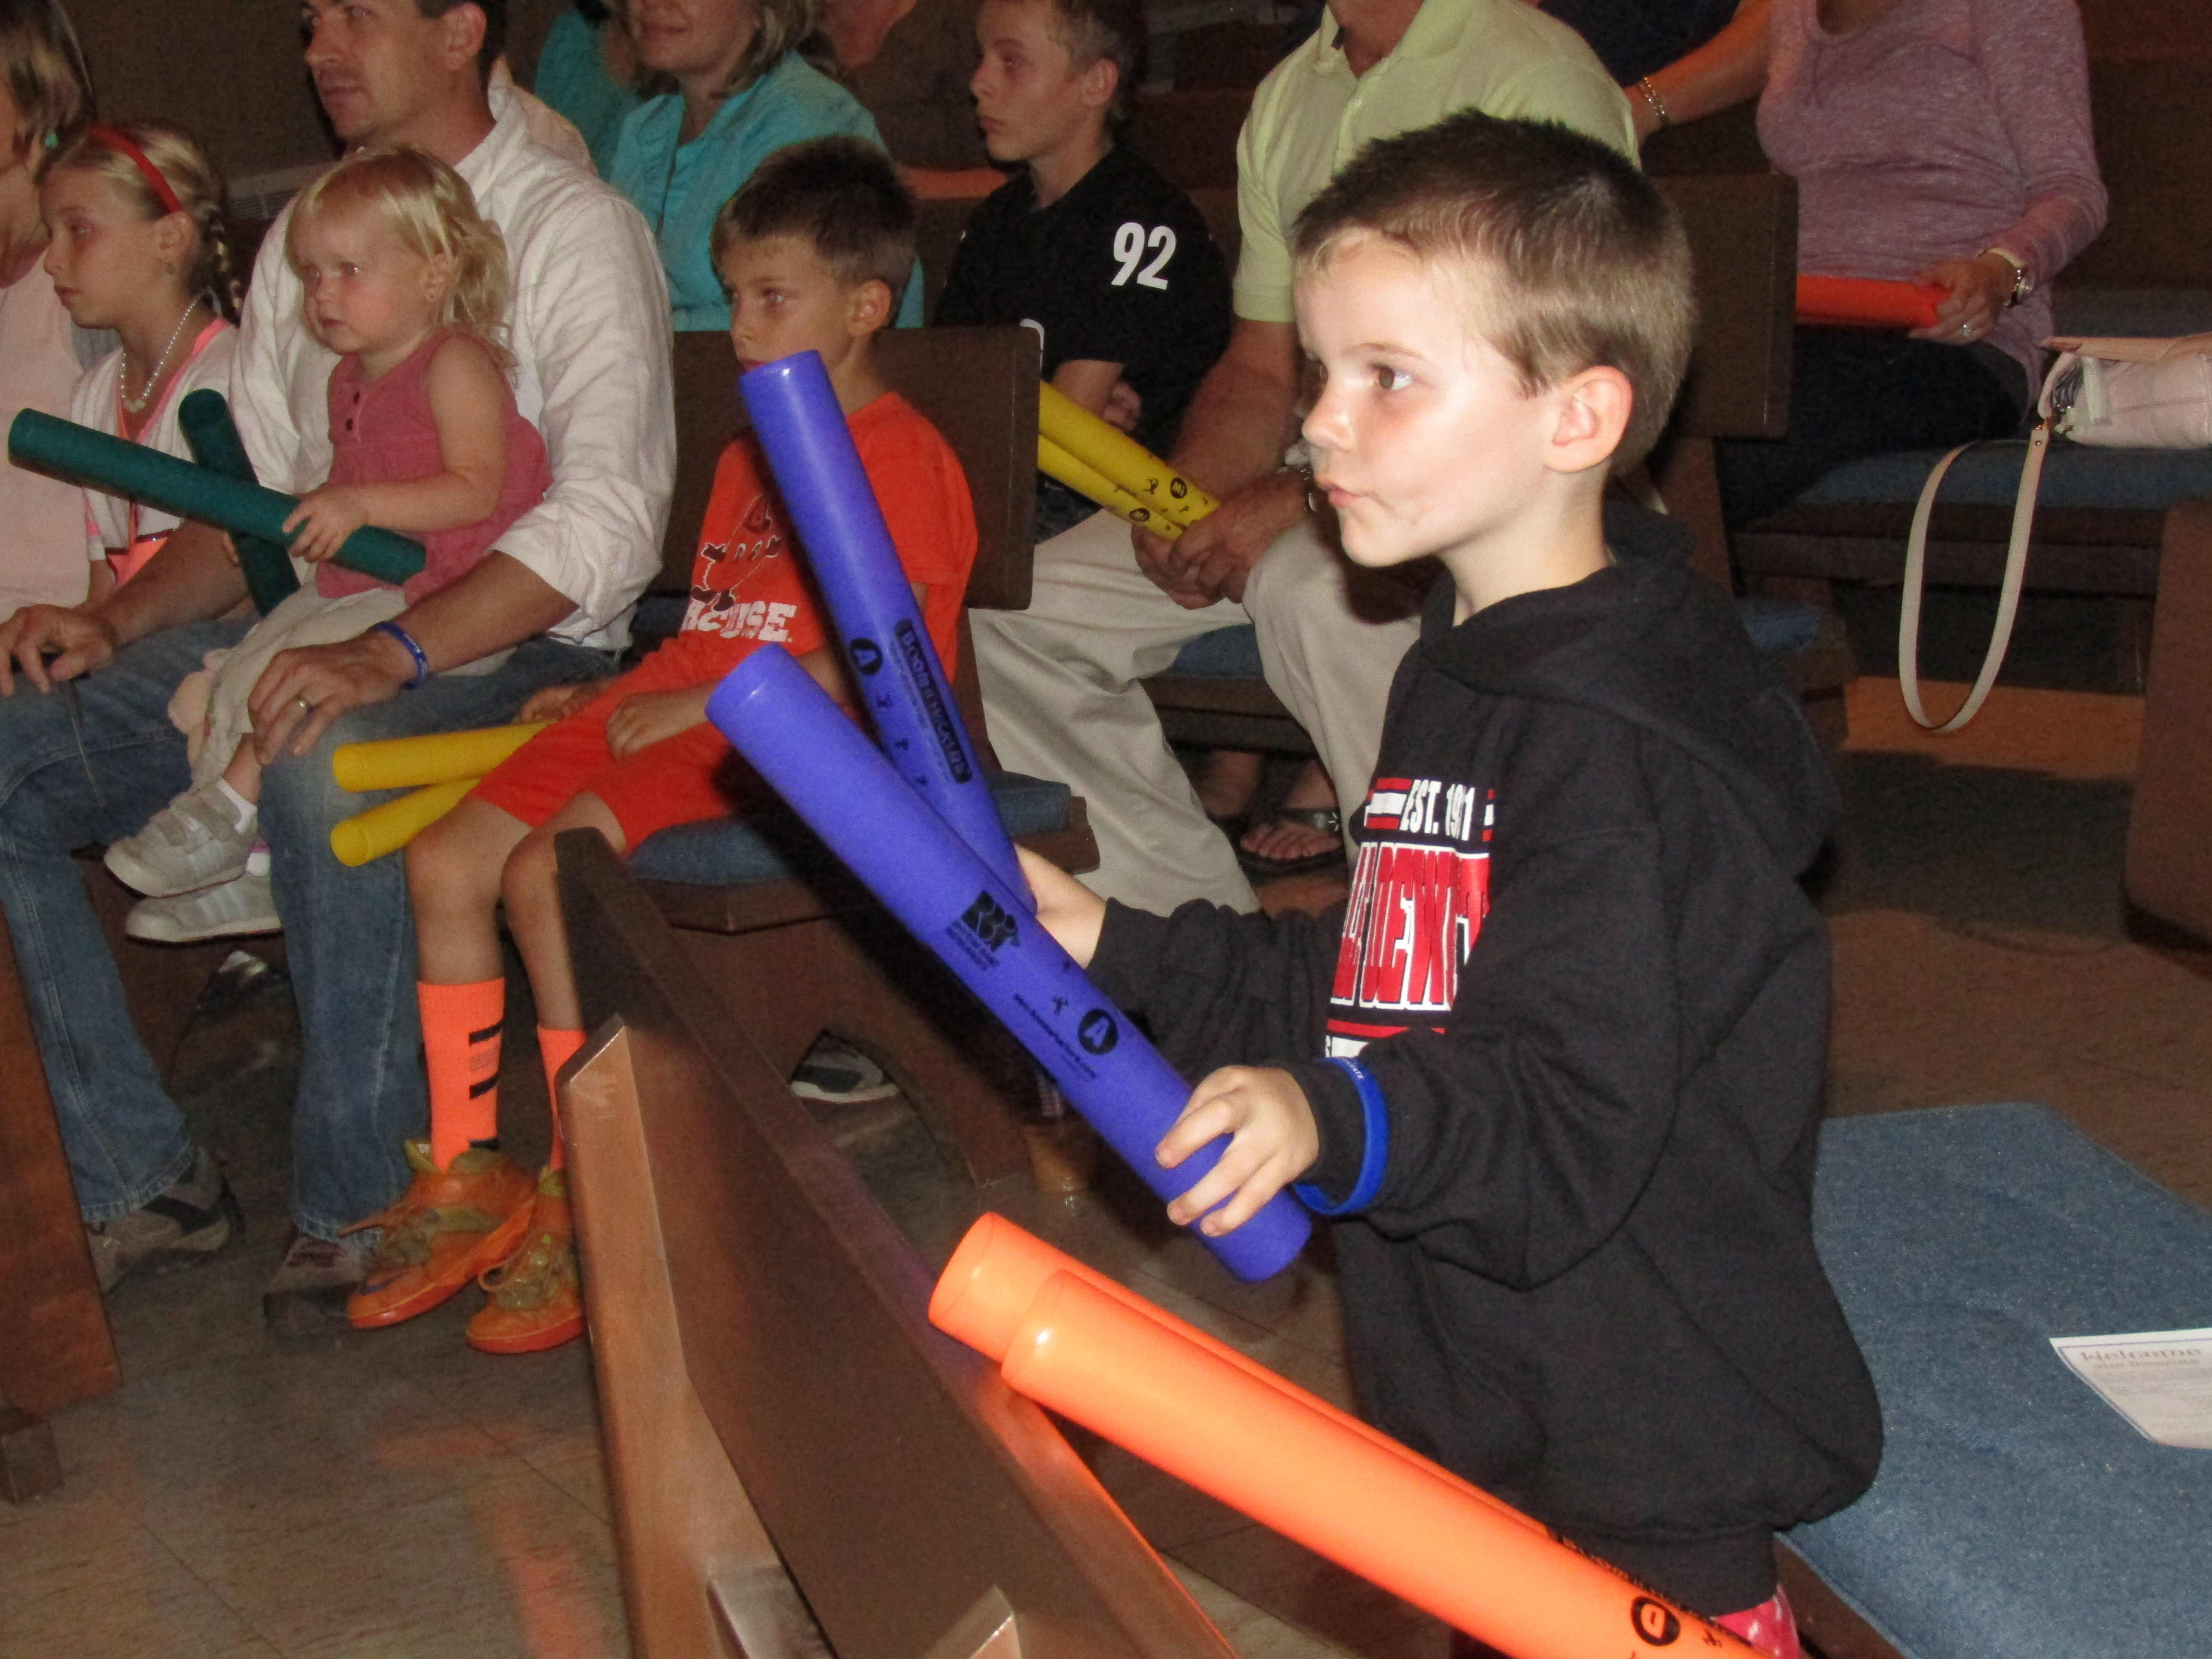 Zachary Cottell, 4, responds to a musical prompt, or rhythm seed, by drumming with purple plastic tubes (boom whackers) at an interactive concert for people affected by autism. The concert was part of a two-day autism awareness event hosted by Upstate‘s Margaret L. Williams Developmental Evaluation Center.